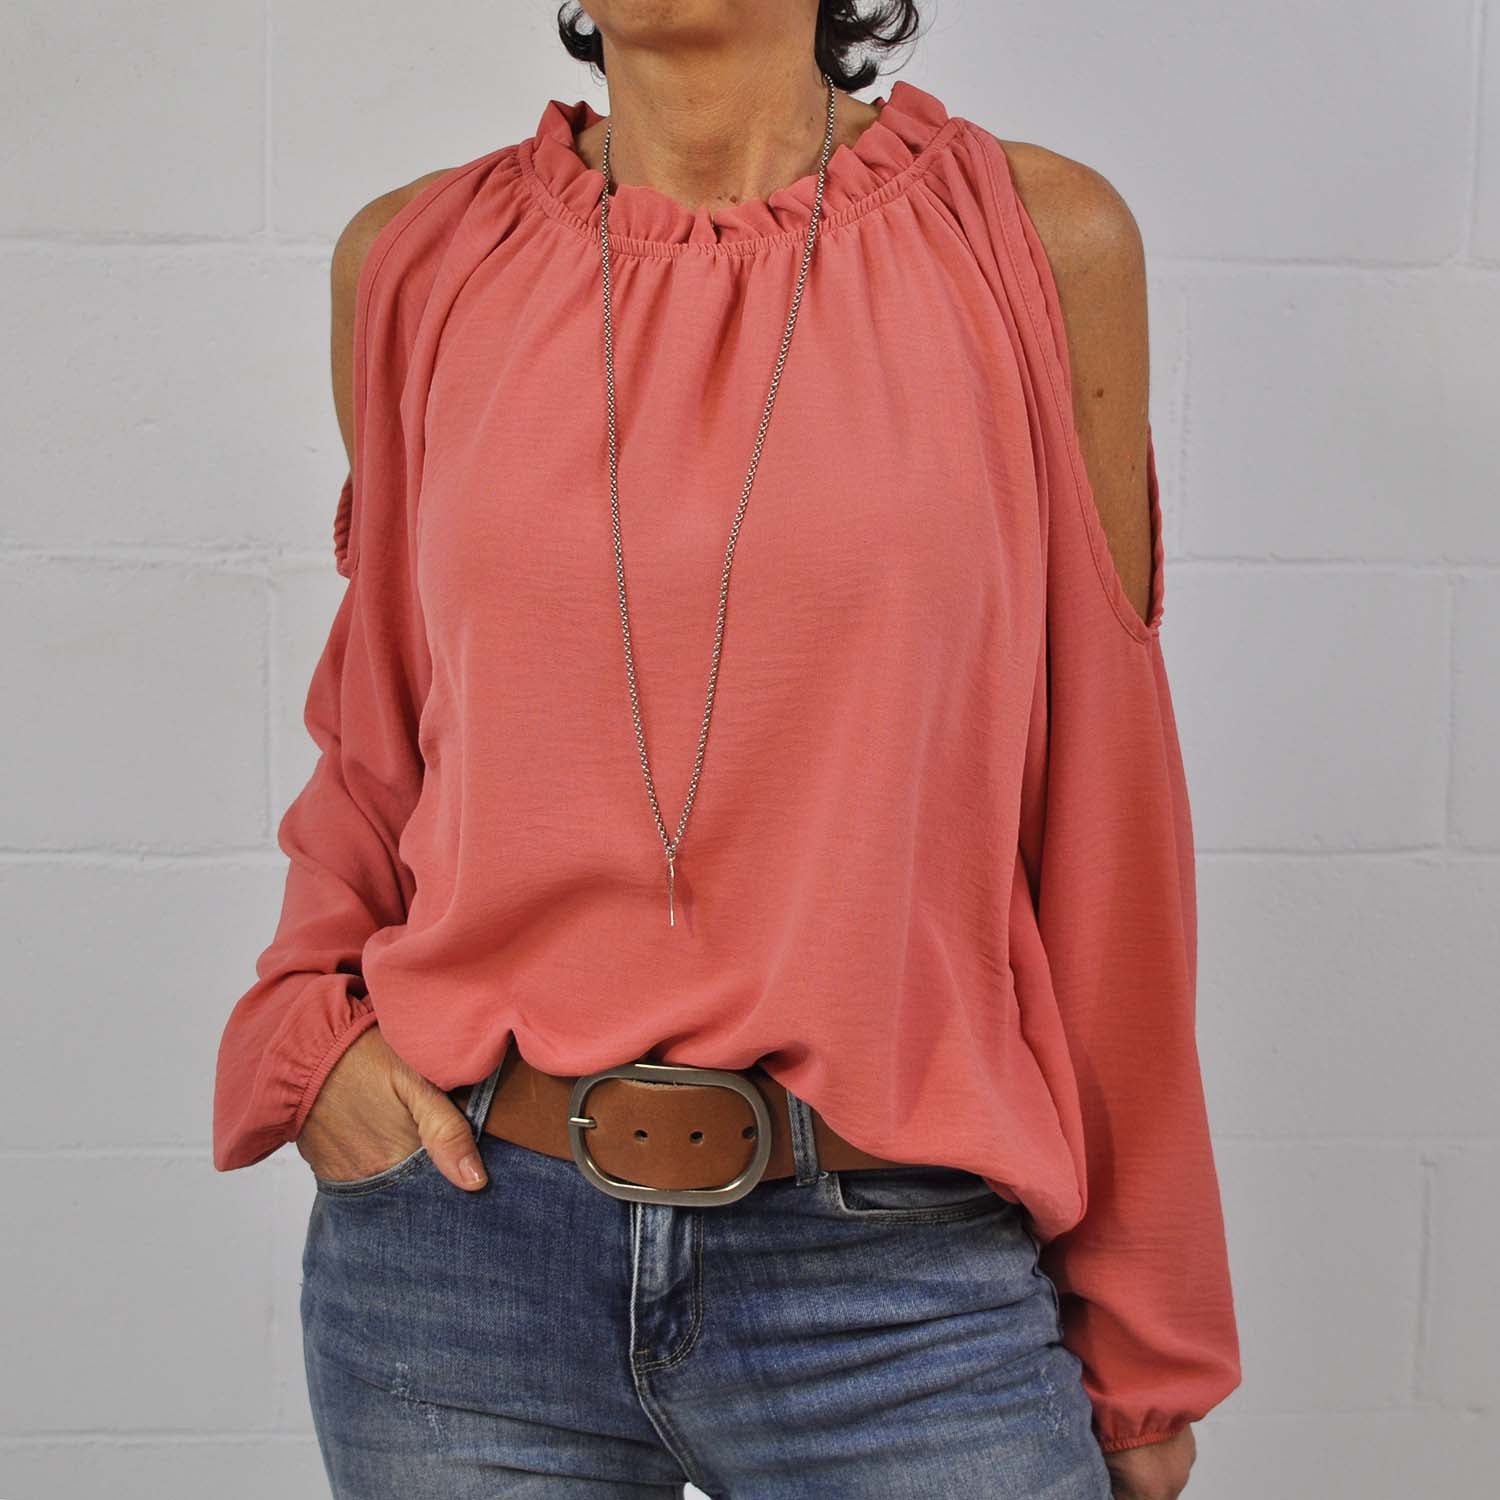 Coral blouse with cut-out shoulders